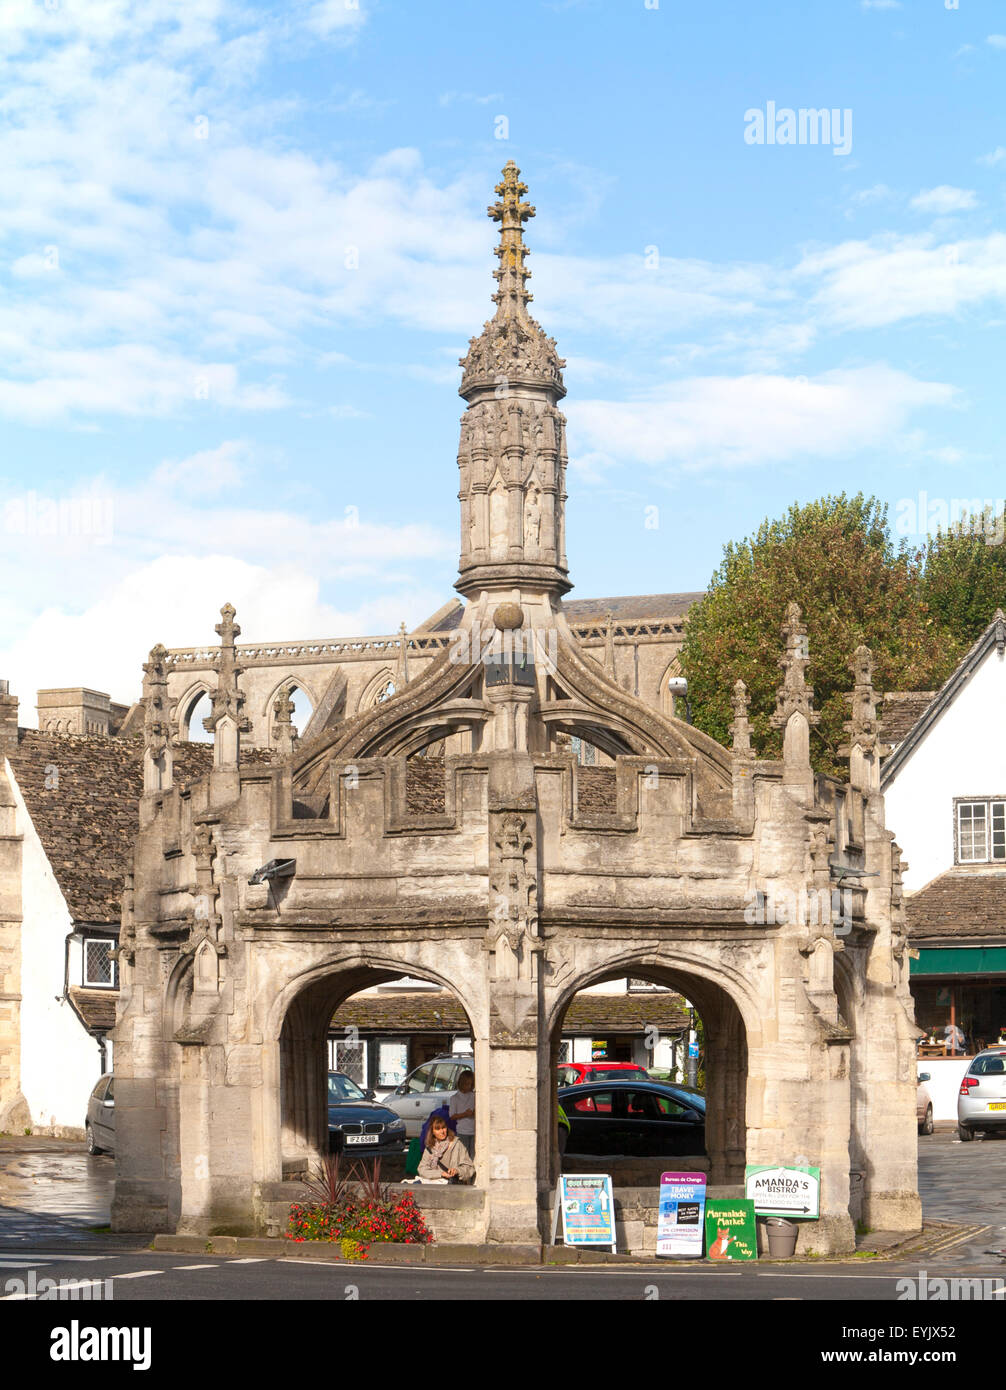 Market Cross dating from 1490 in Malmesbury, Wiltshire, England, UK Stock Photo